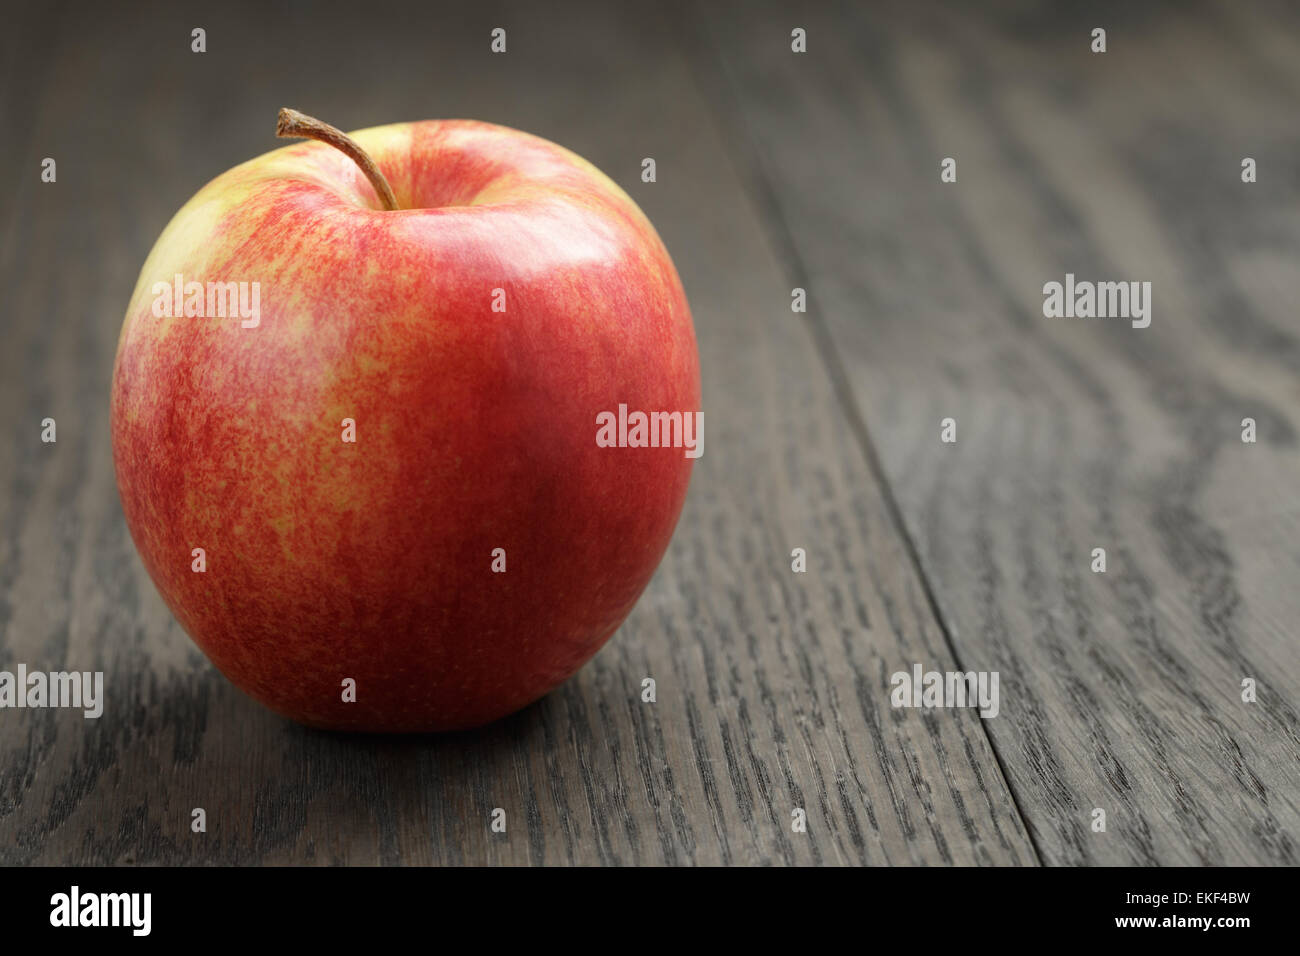 one red apple on wood table Stock Photo